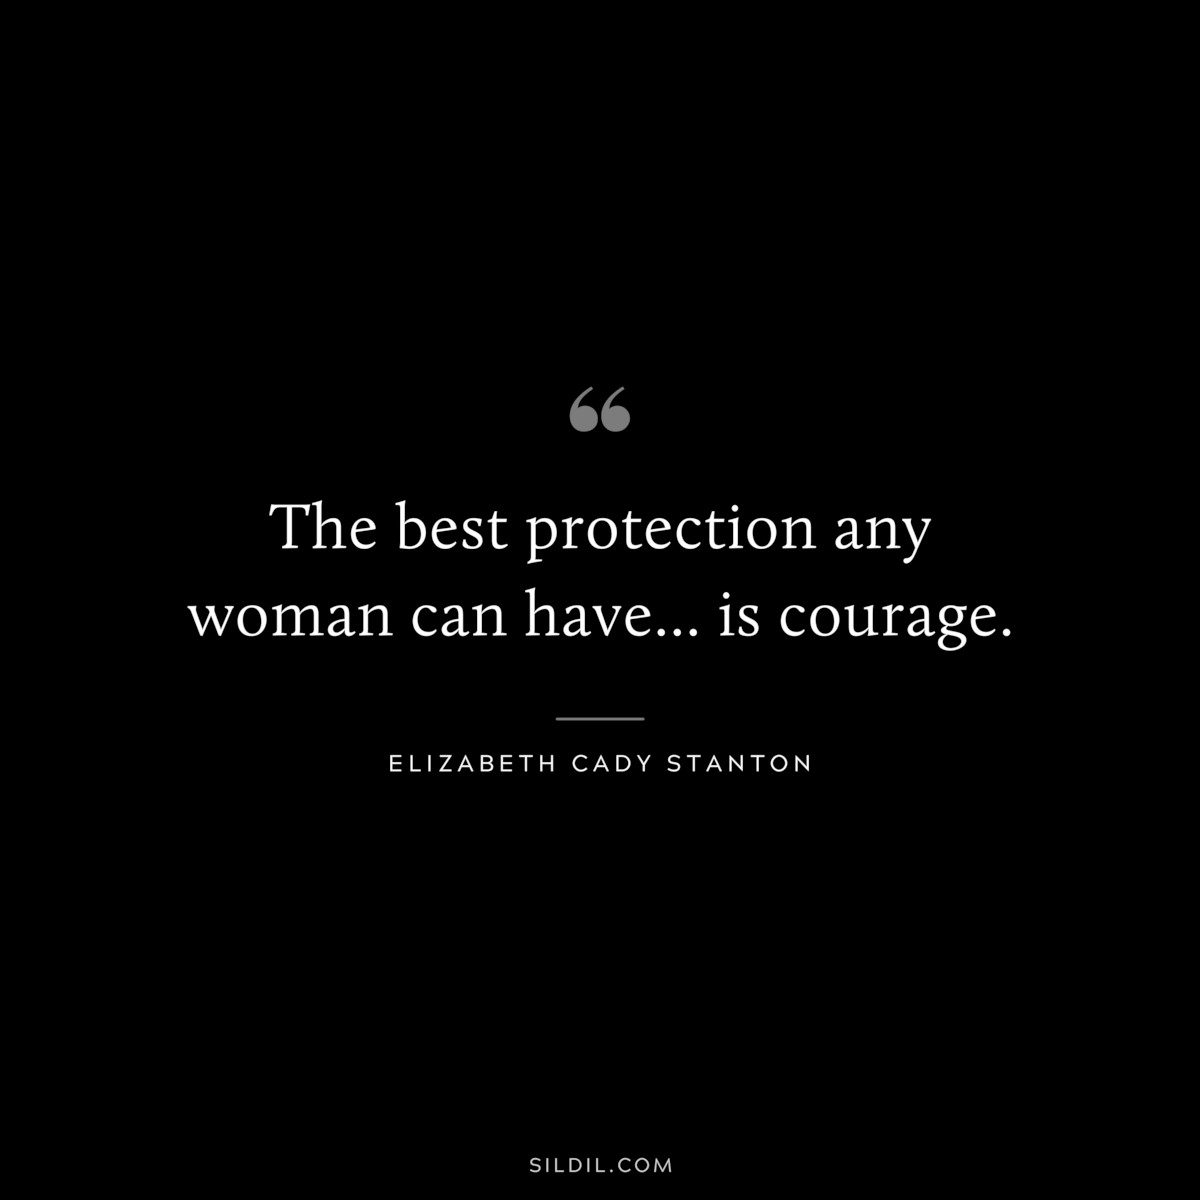 The best protection any woman can have... is courage. ― Elizabeth Cady Stanton